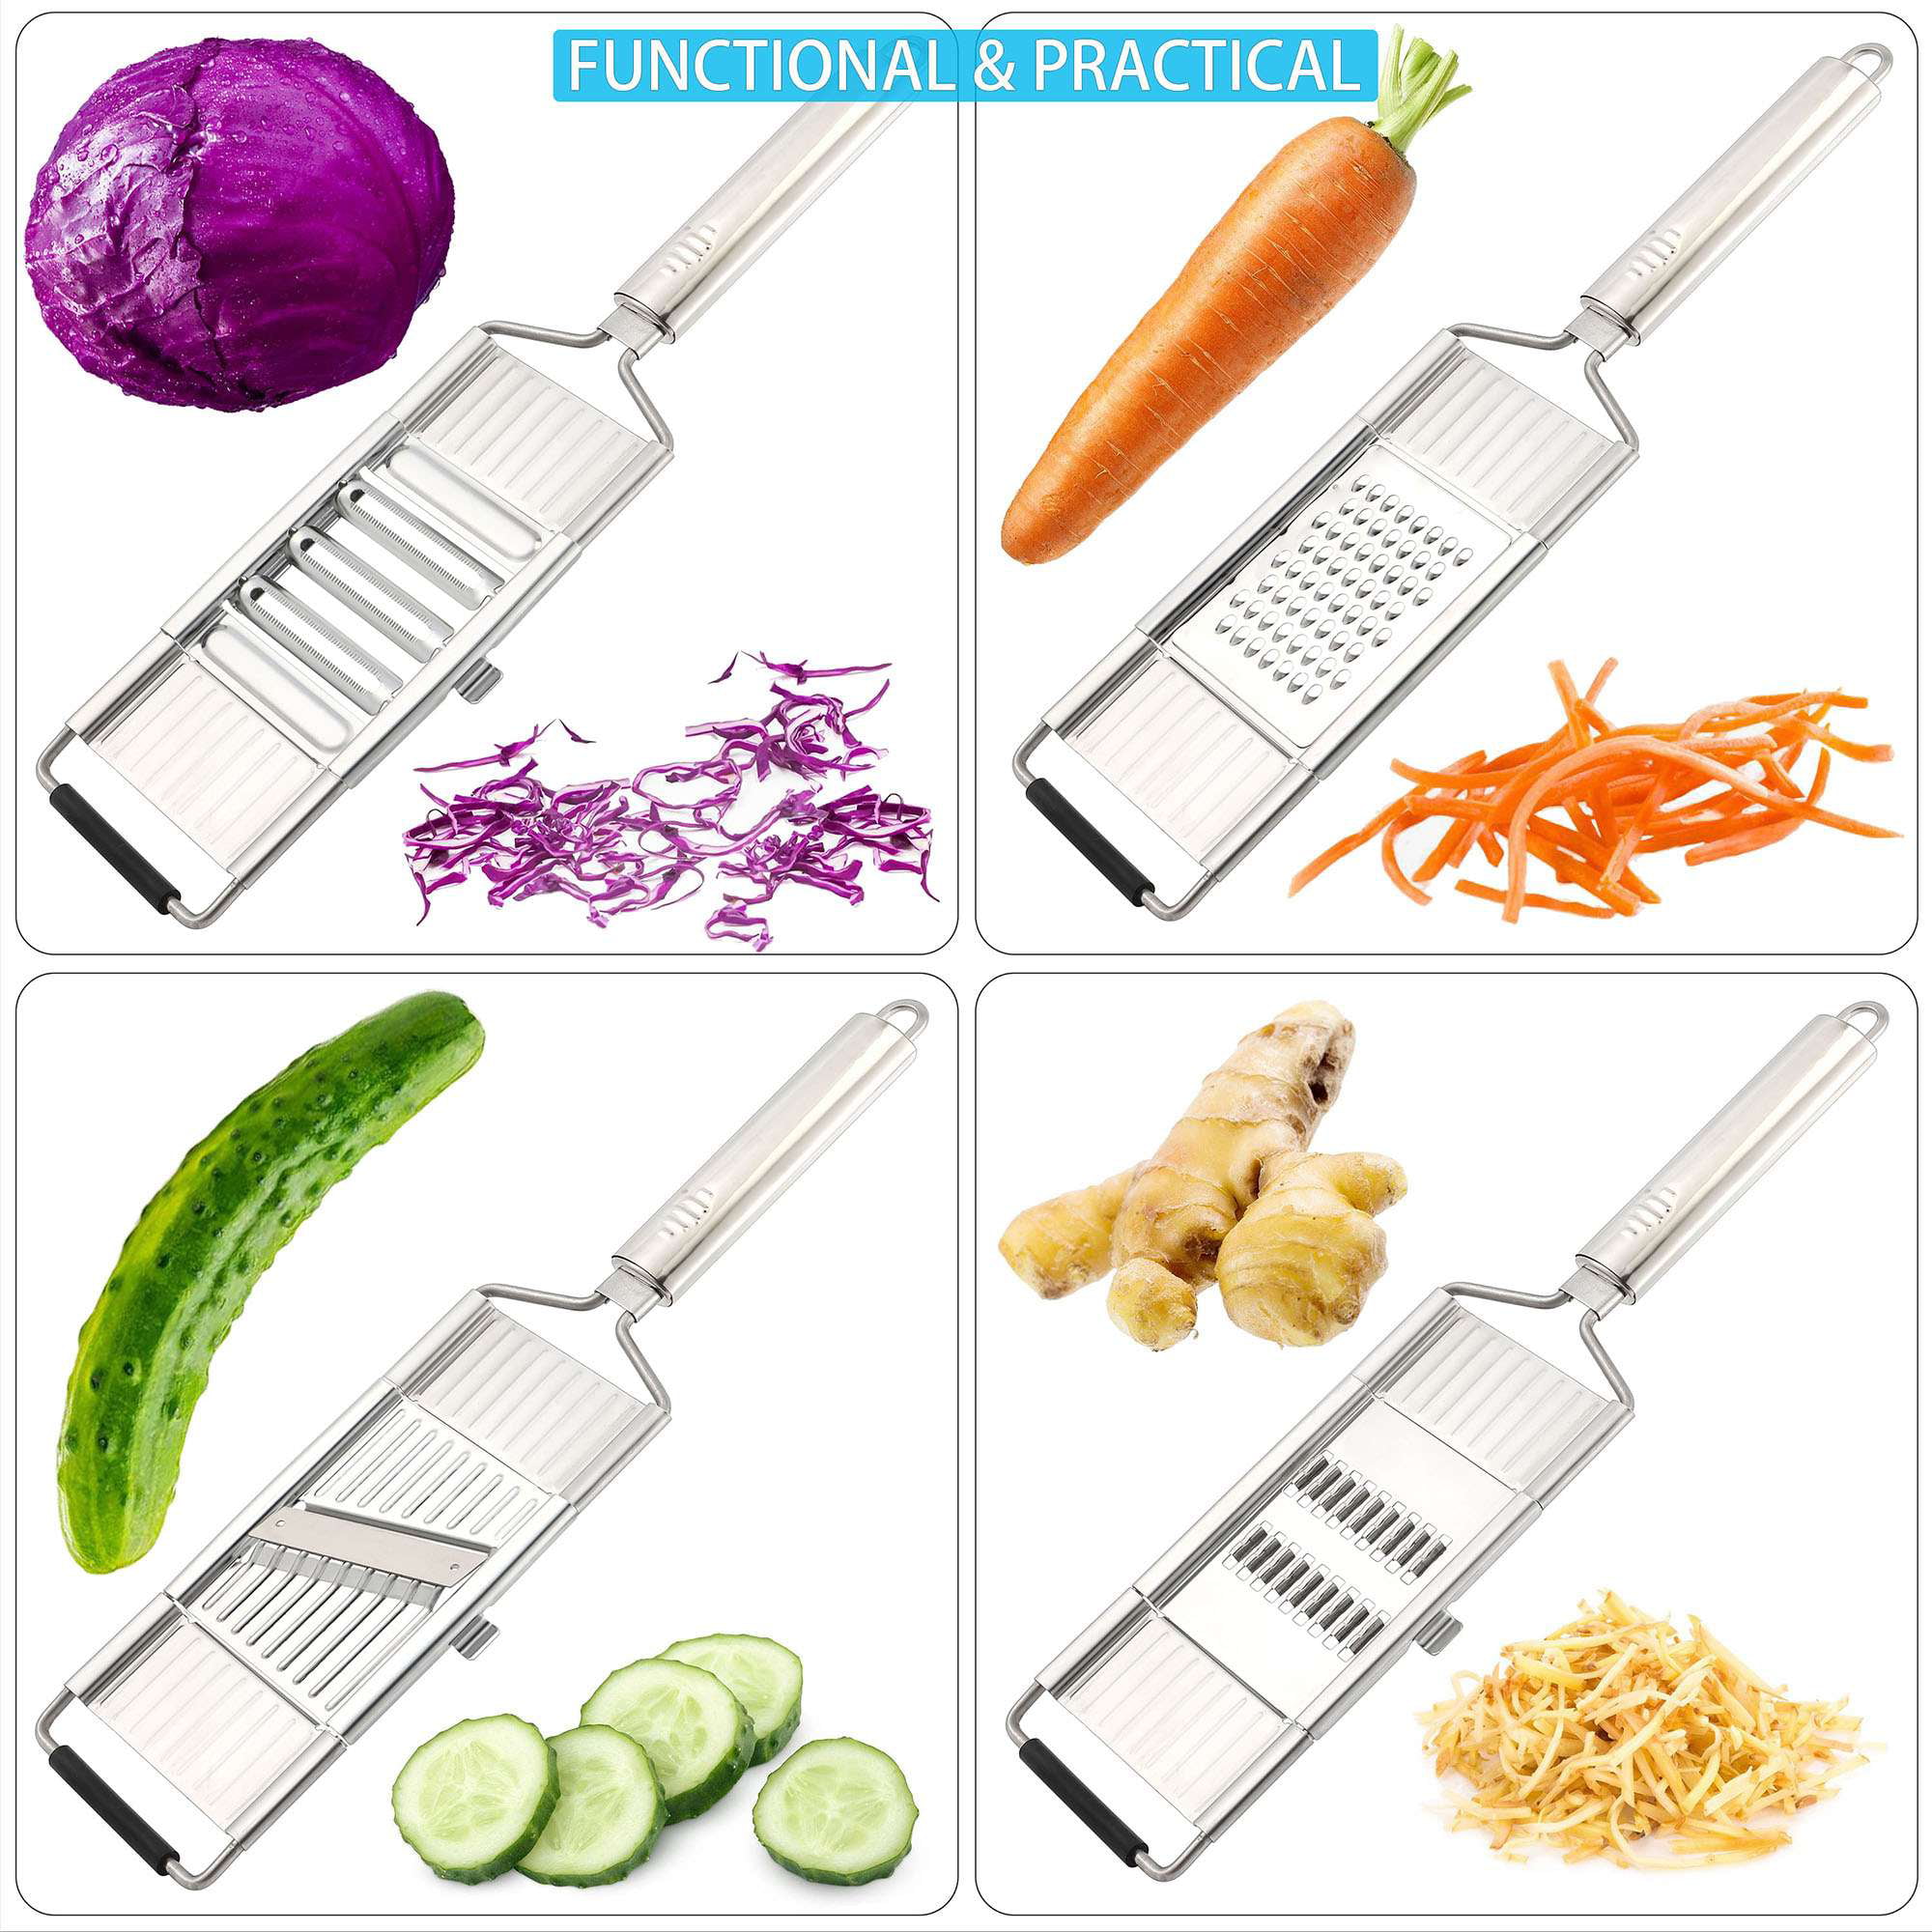 Suuker Multi-Purpose Vegetable Slicer Set,Stainless Steel Cheese Grater & Vegetable Chopper with 4 Adjustable Blades for Vegetables, Fruits,hand-held